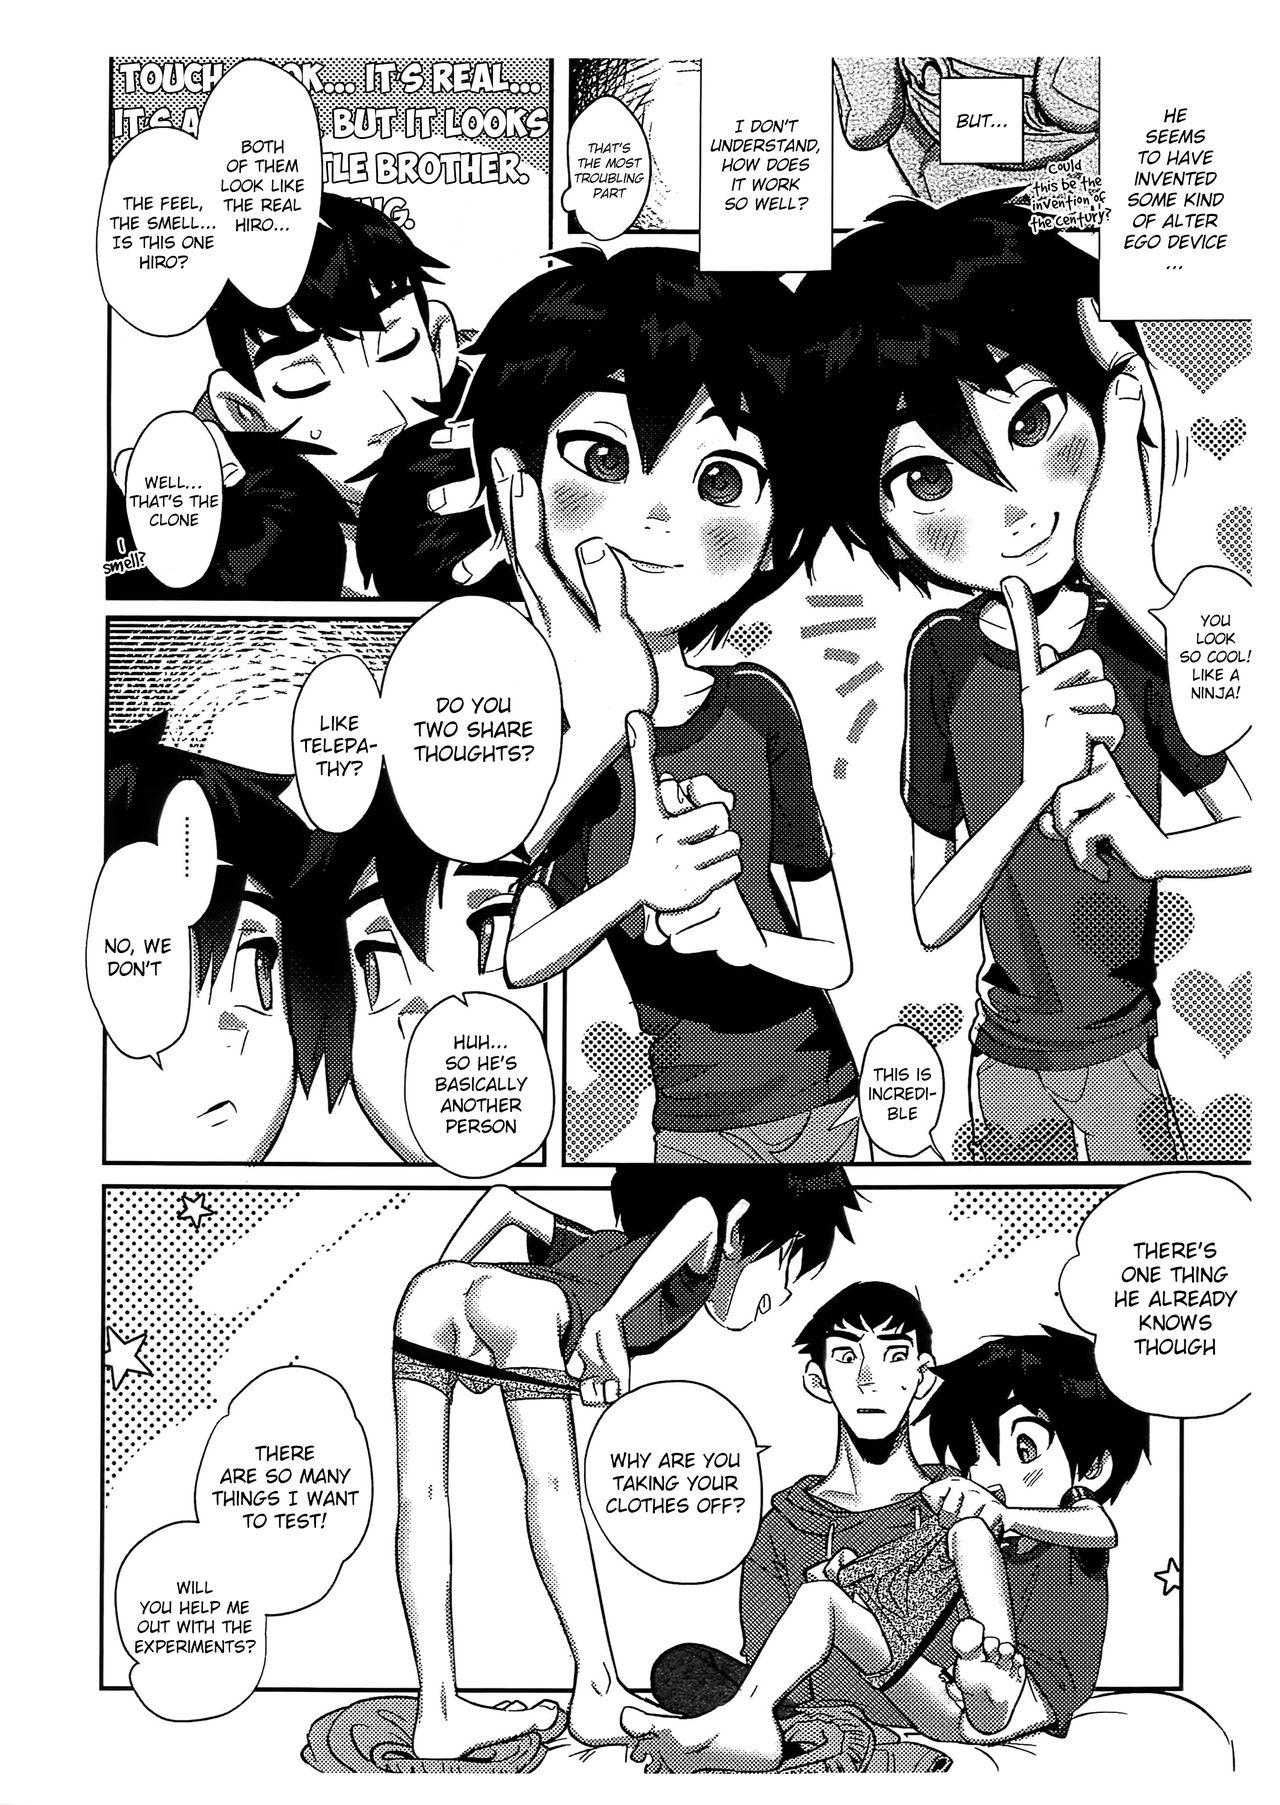 (HaruCC23) [SGPT (Shi)] Double My Little Brother!! [Zenhan] | Double My Little Brother!! [First Half] (Big Hero 6) [English] {Shotachan} 2